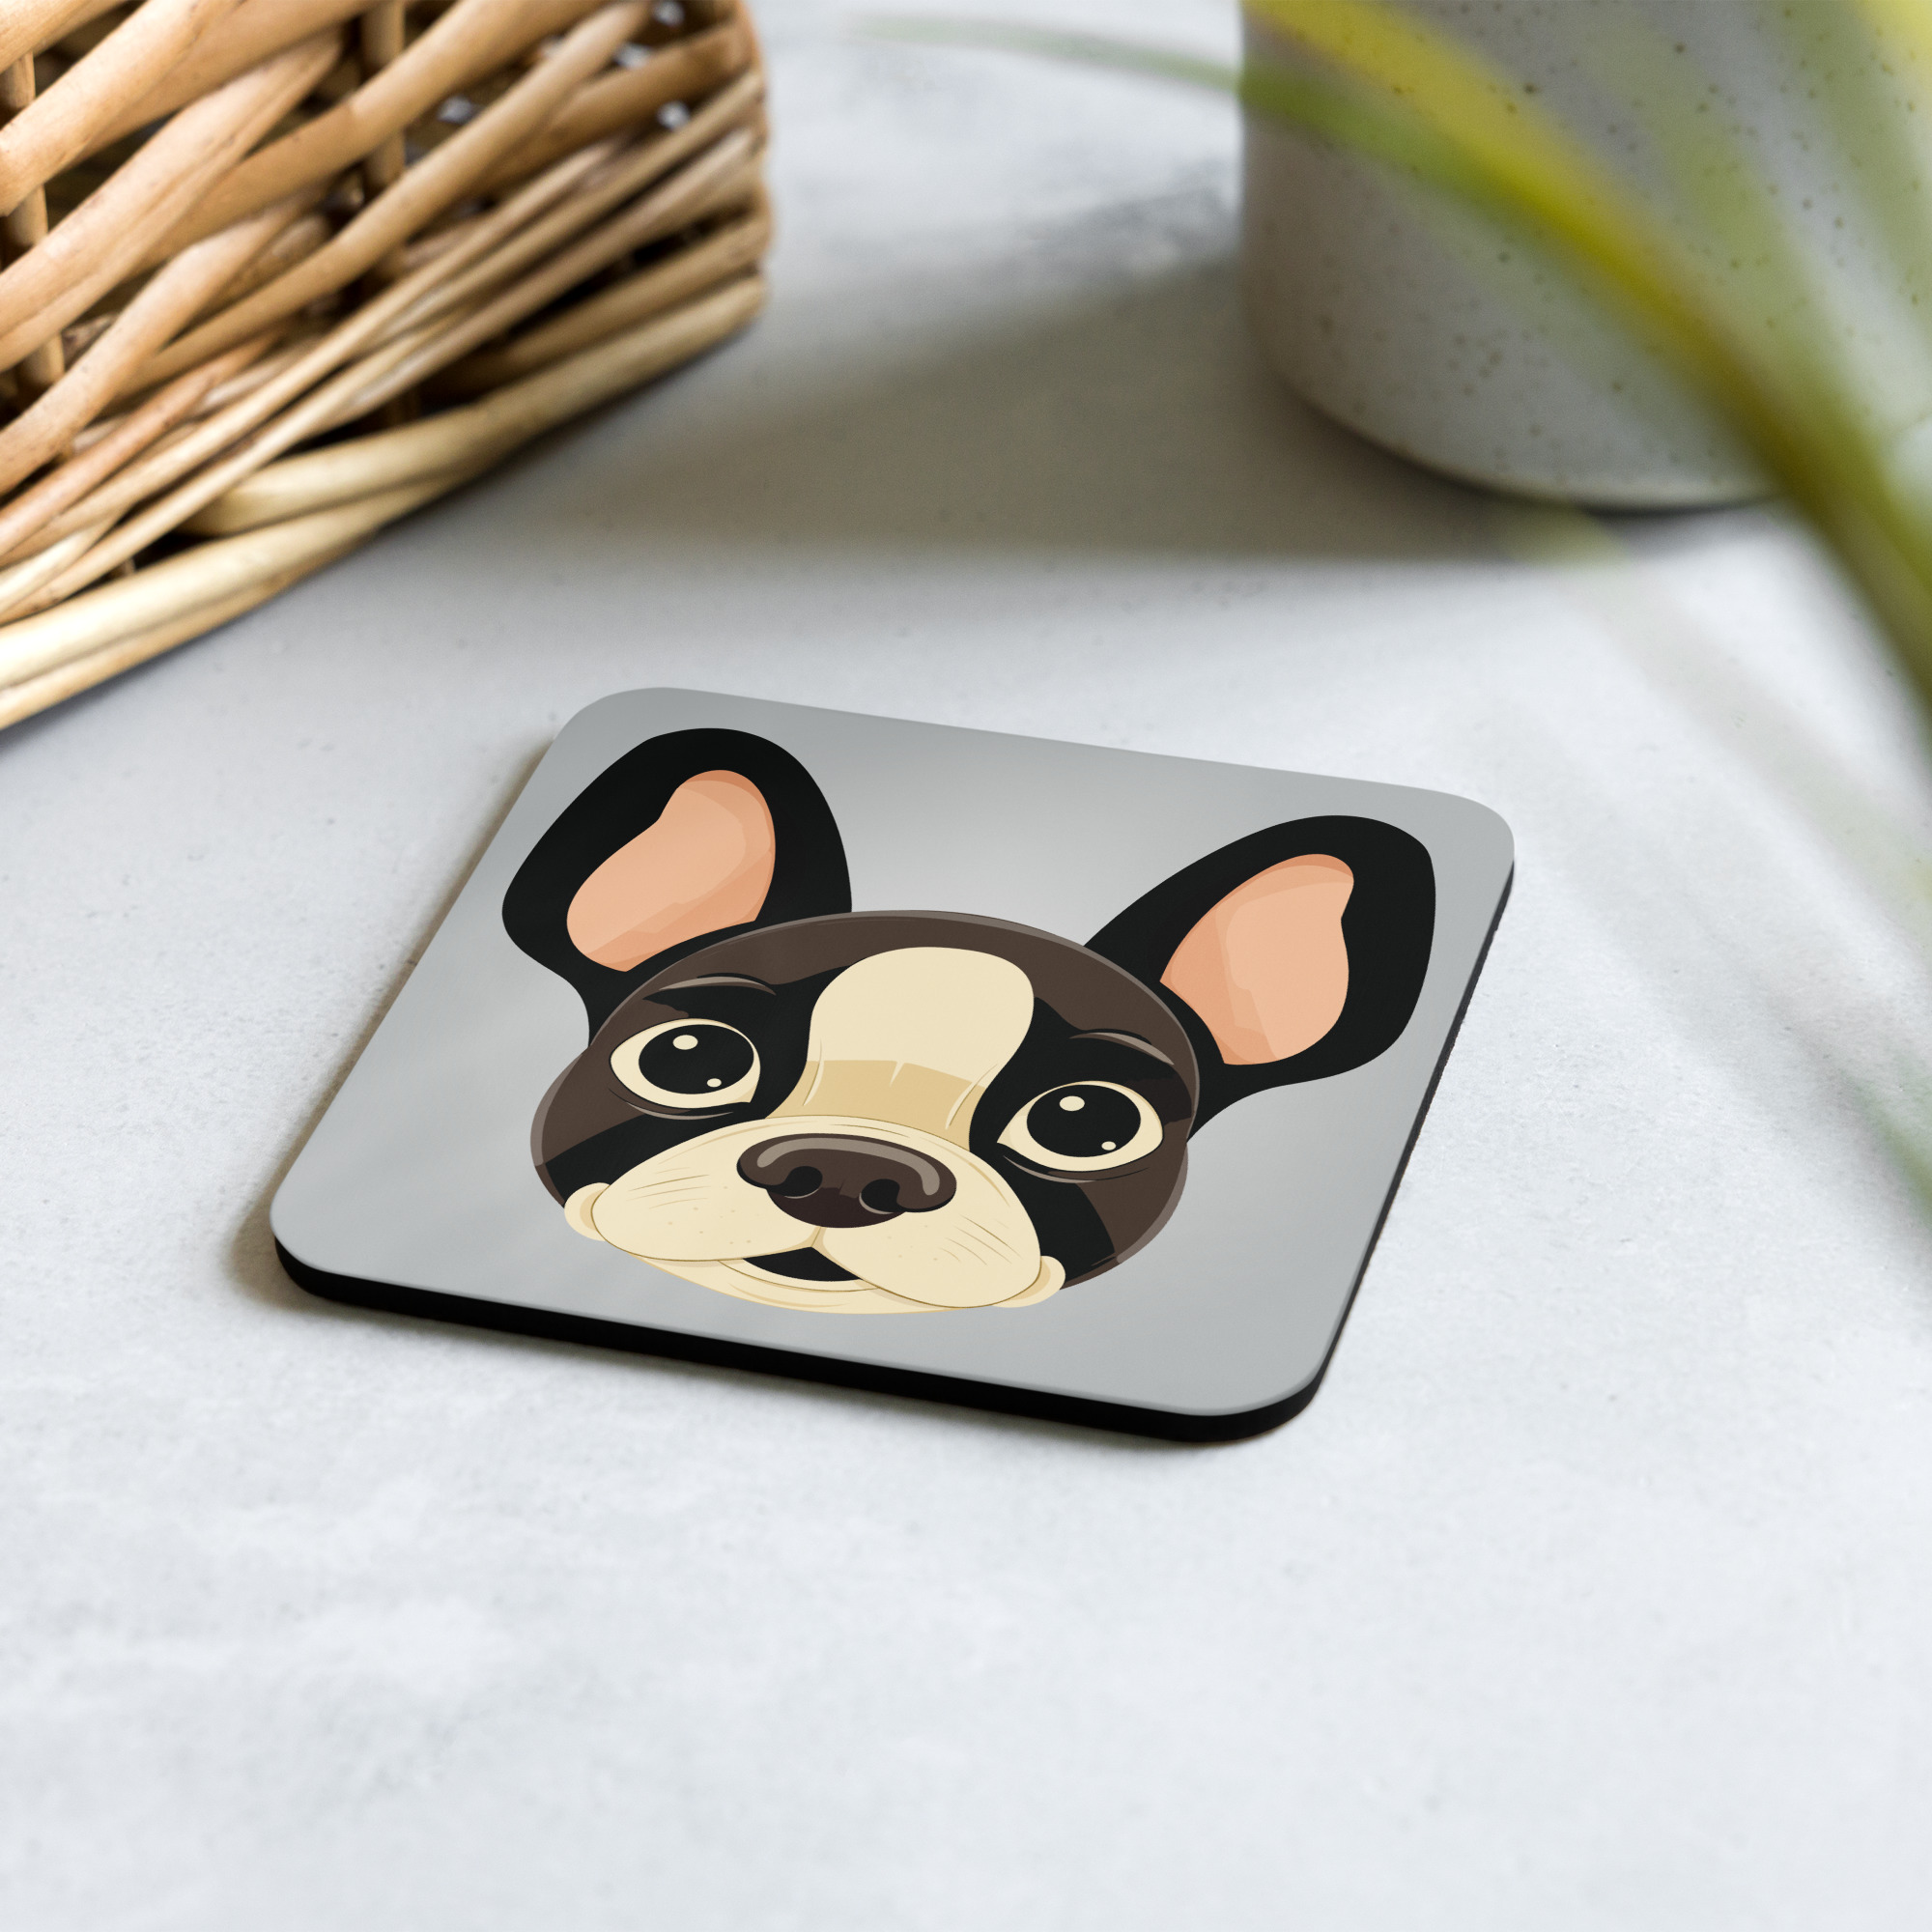 Gray Retro Boston Terrier Cork-back Coaster on White Surface with Food